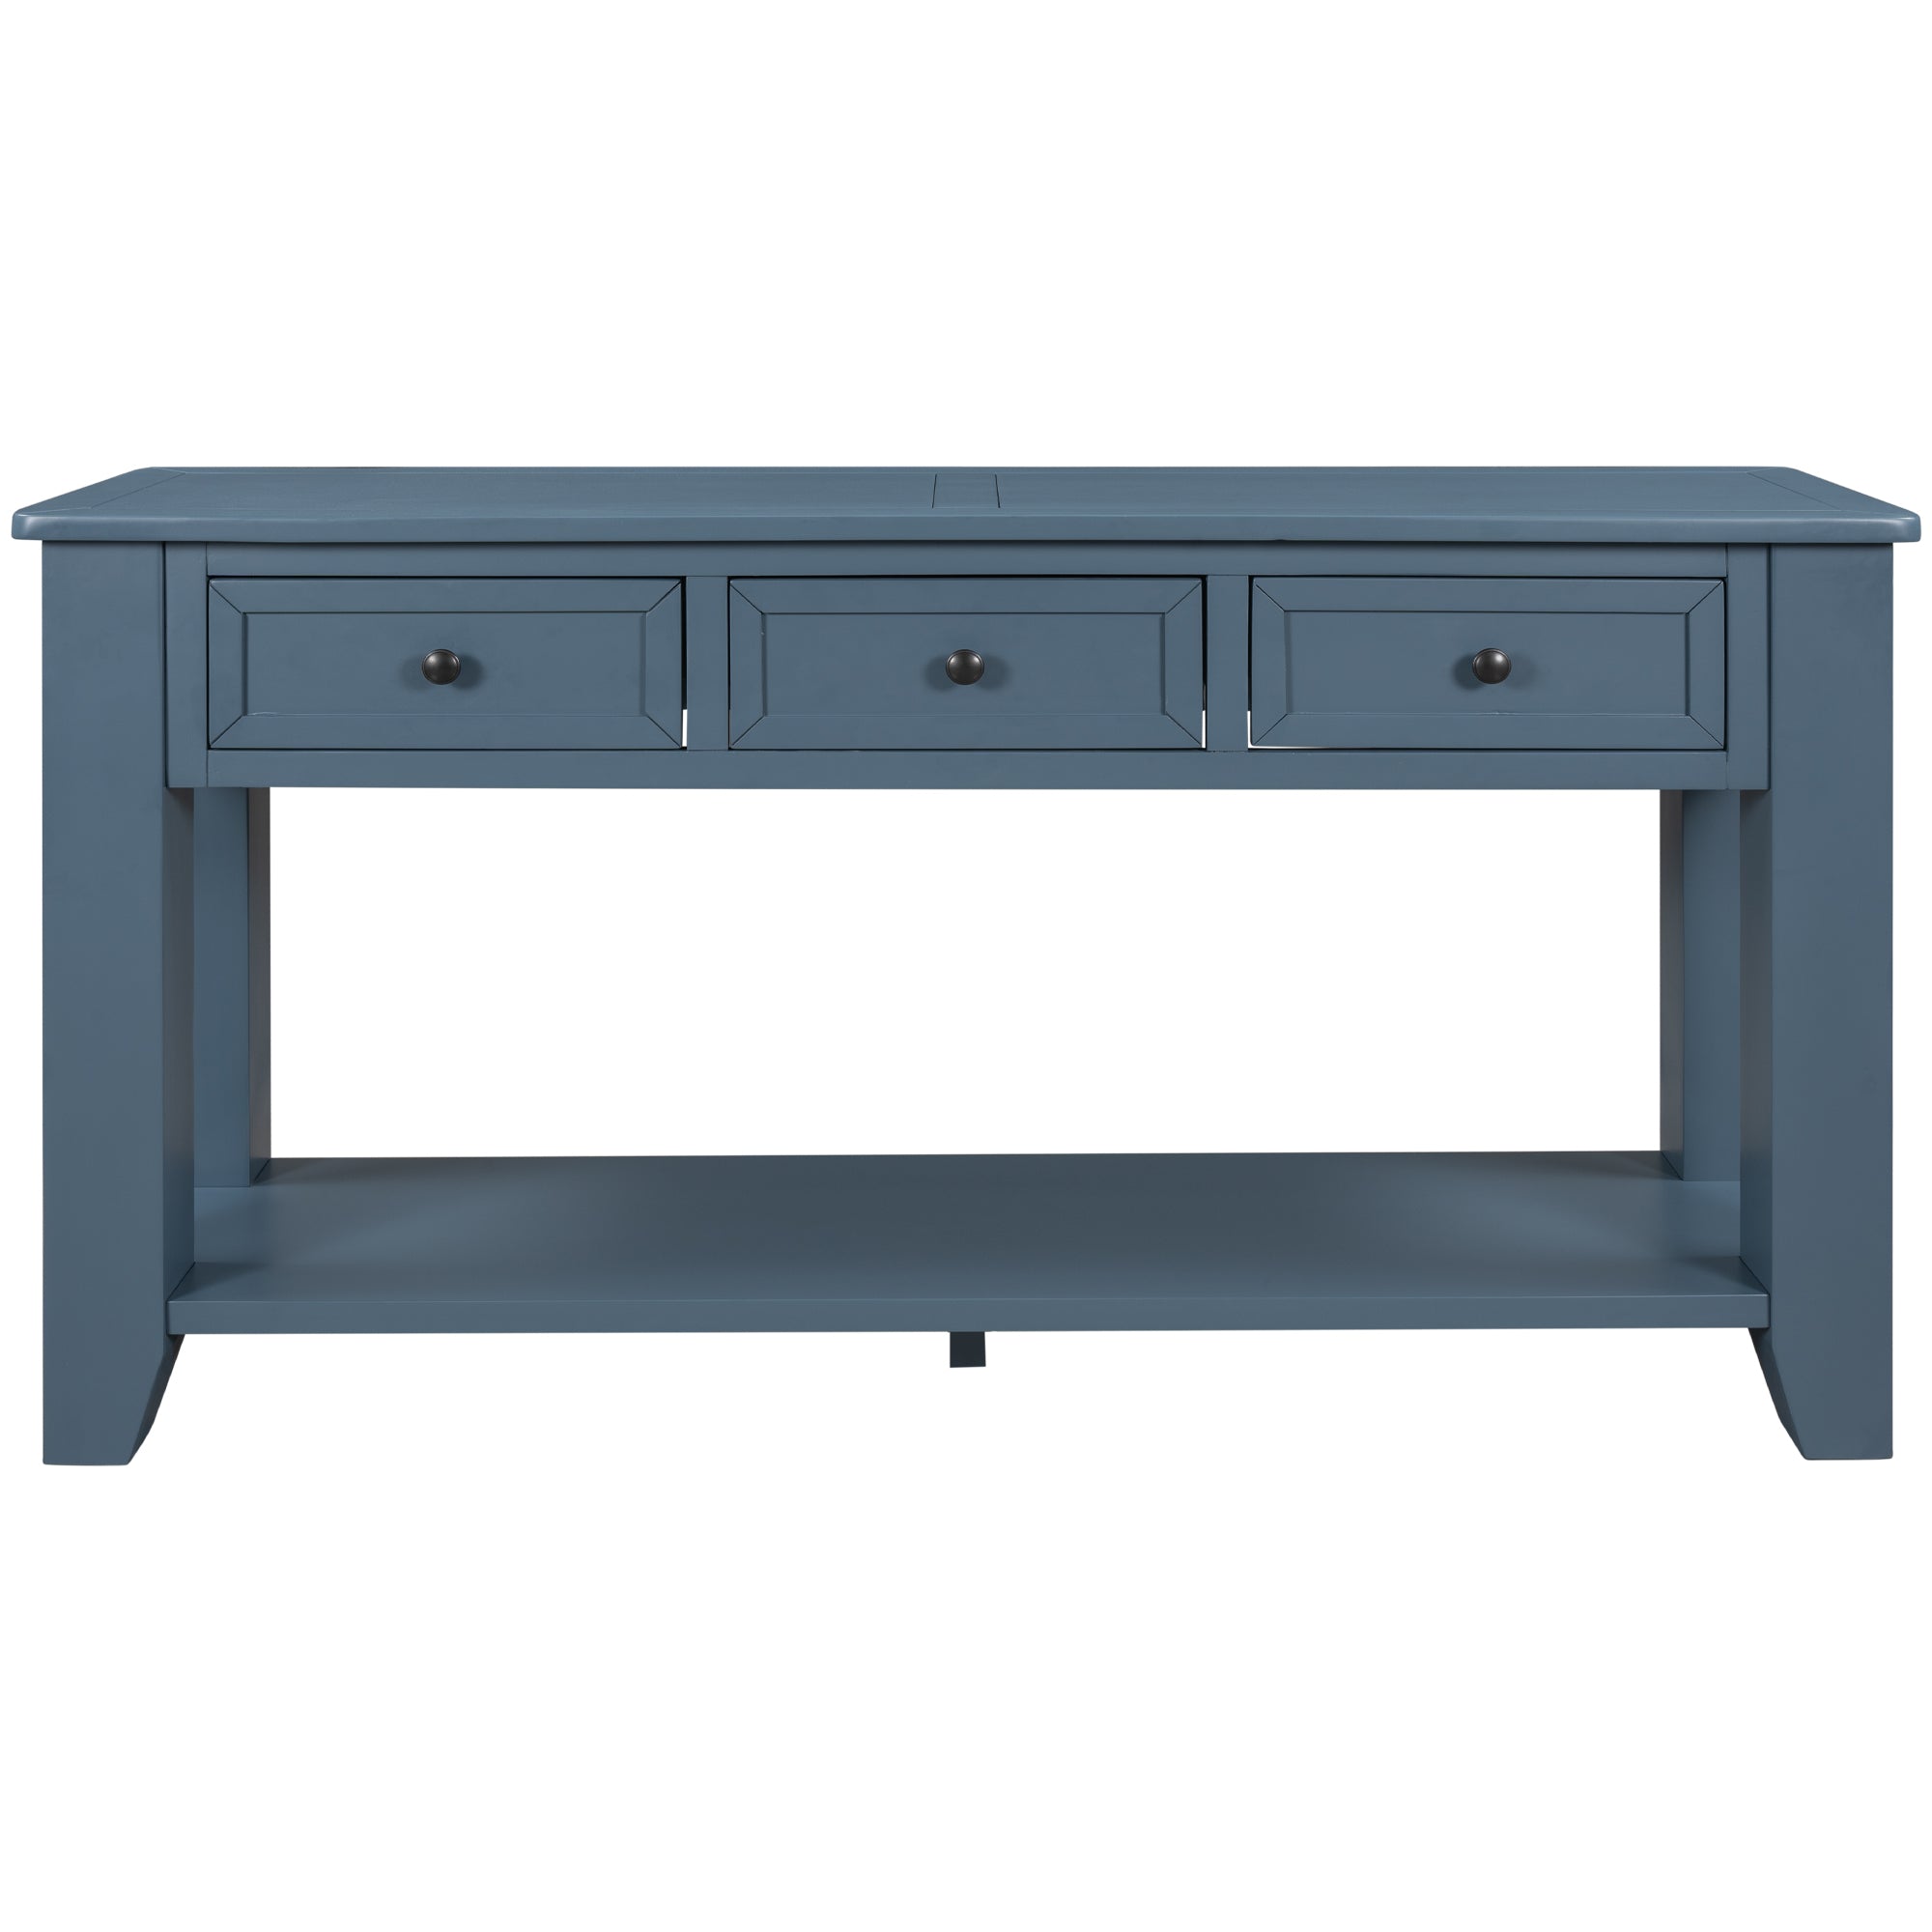 55" Modern Console Table Sofa Table for Living Room with 3 Drawers and 1 Shelf